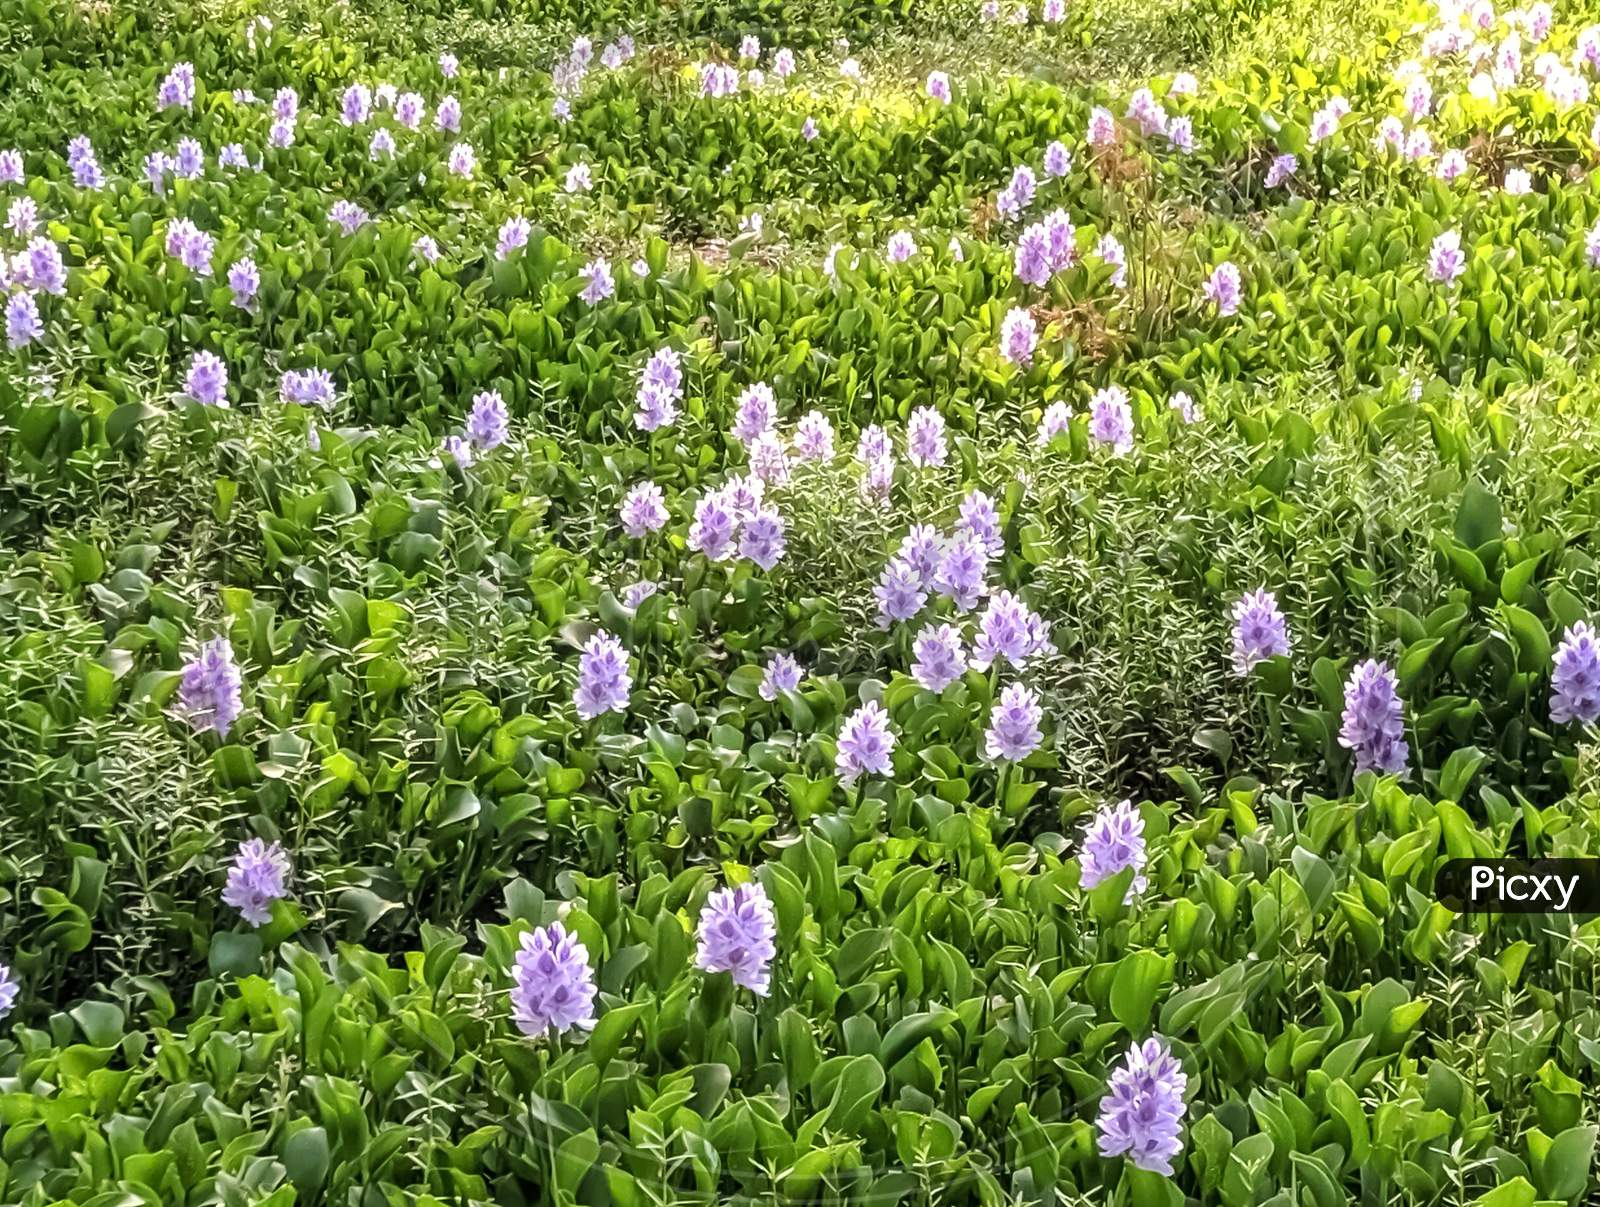 Common water hyacinth flowers